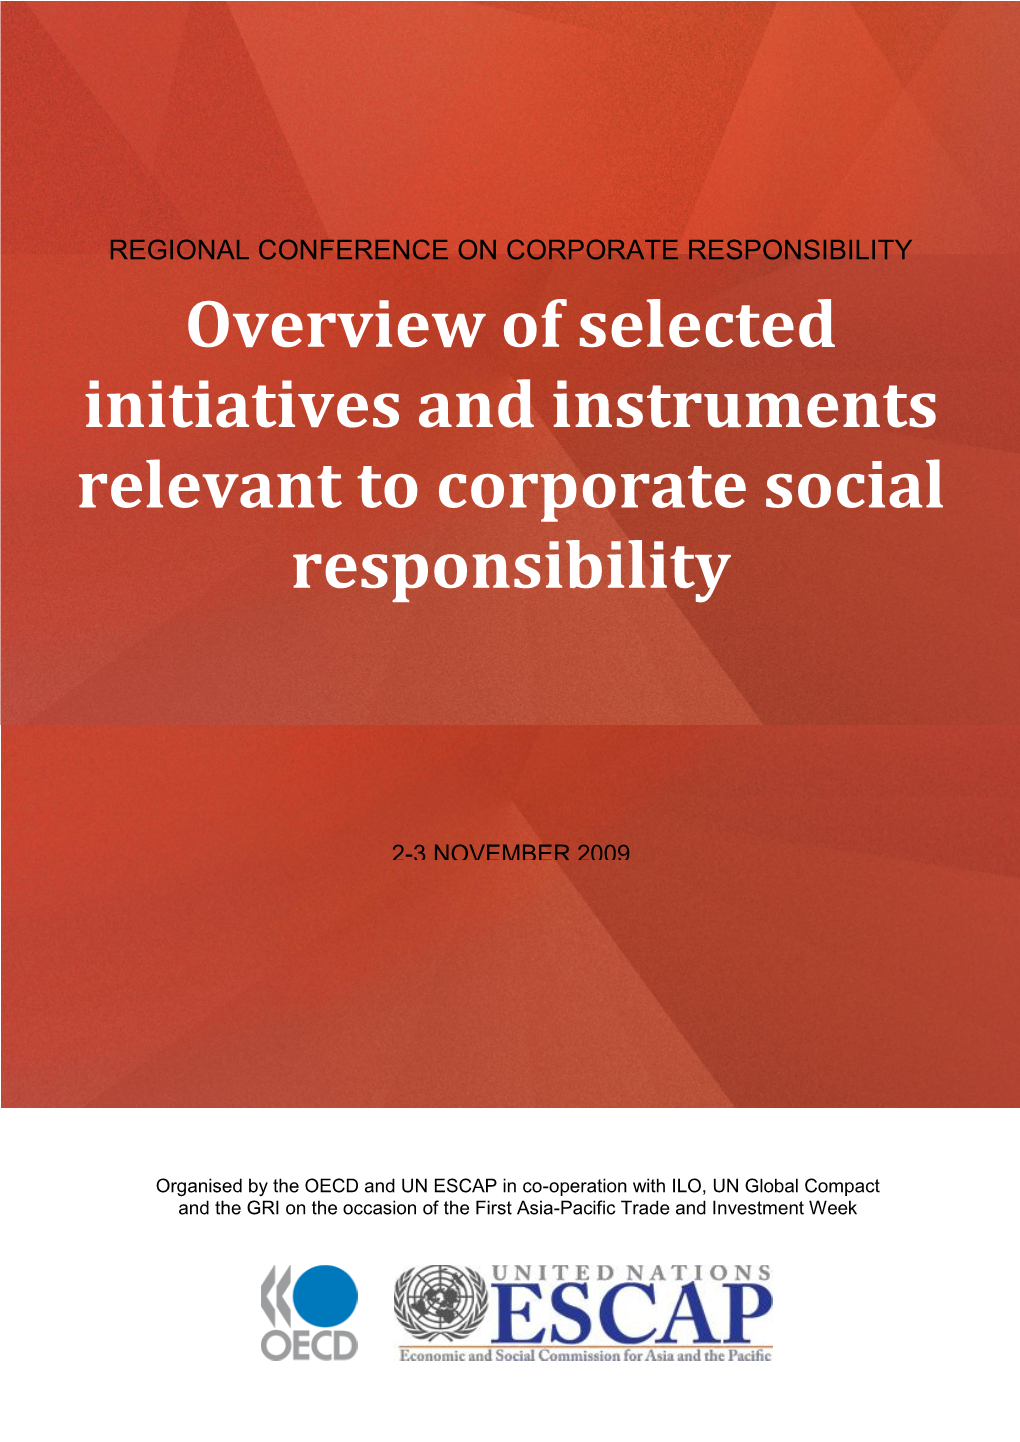 Overview of Selected Initiatives and Instruments Relevant to Corporate Social Responsibility